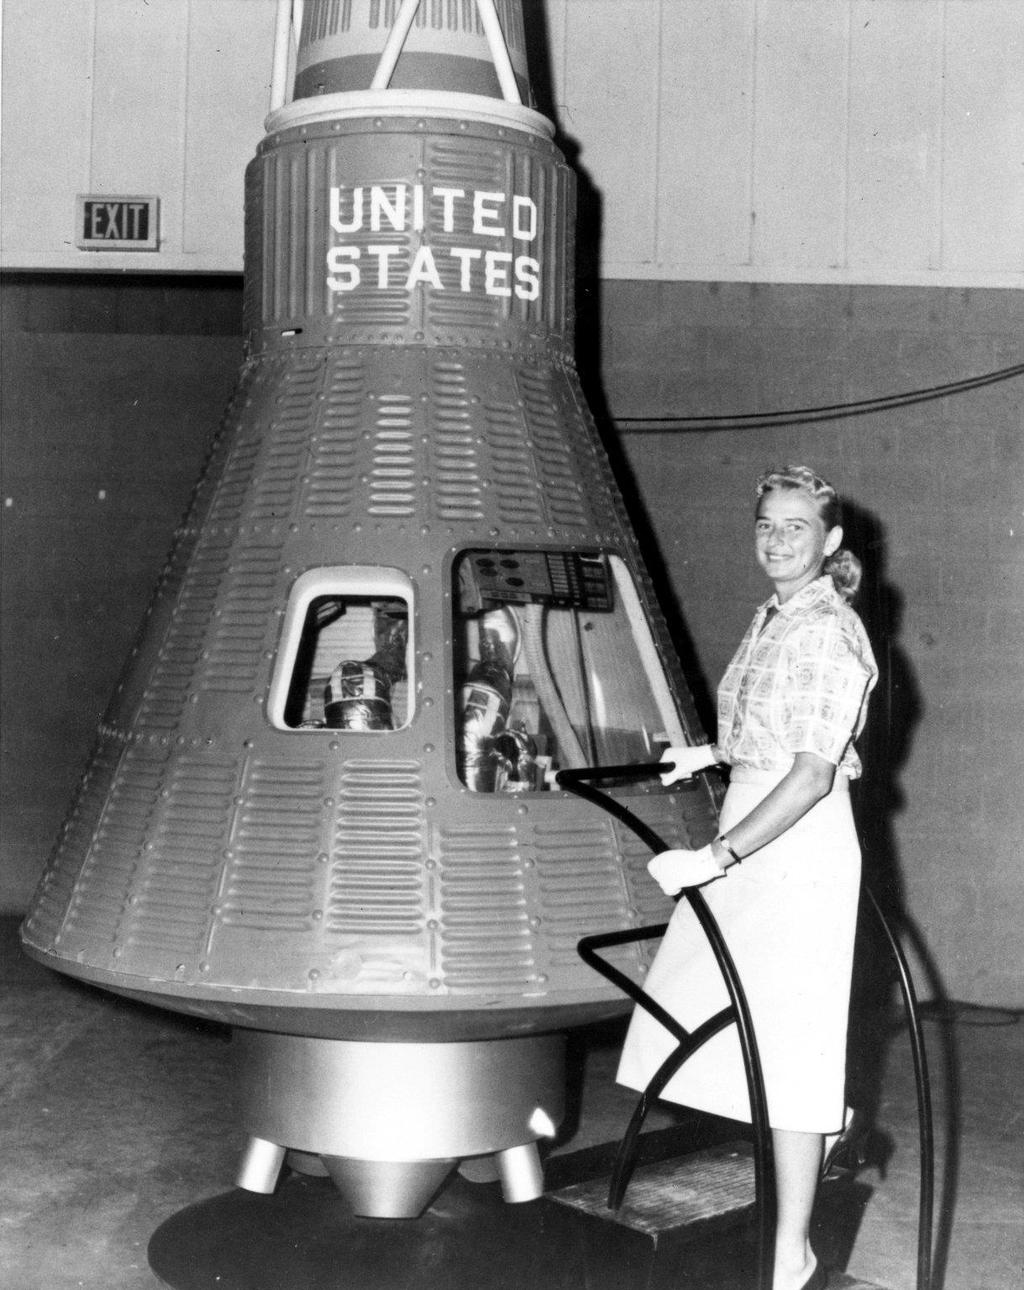 Project Mercury 1959 1963 NASA s first program designed to put an American in space Capsule could carry